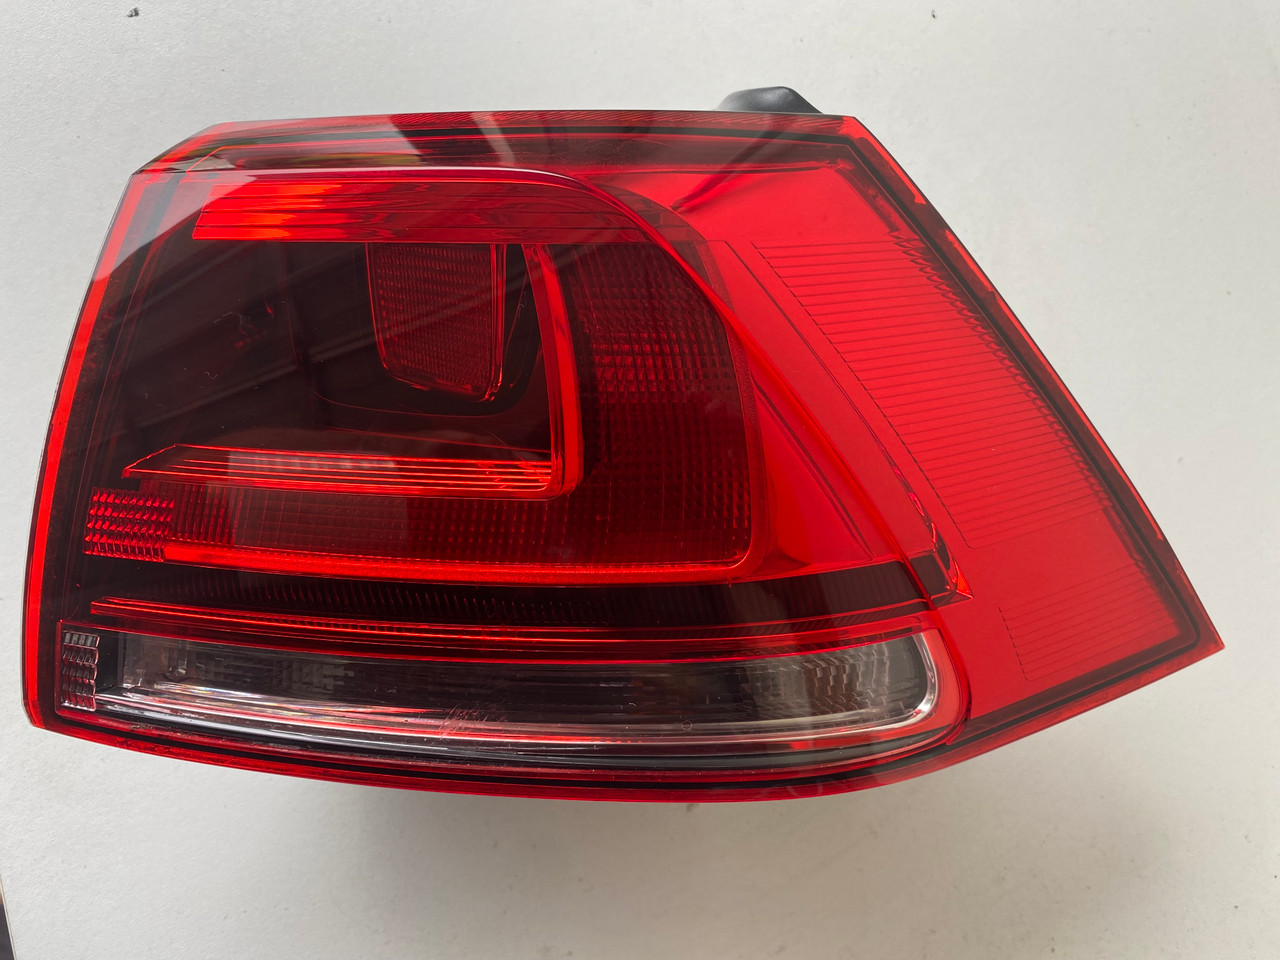 VW GOLF MK7 USED RH OUTER TINTED TAIL LIGHT 5G0 945 096 P - Parts 4 ...